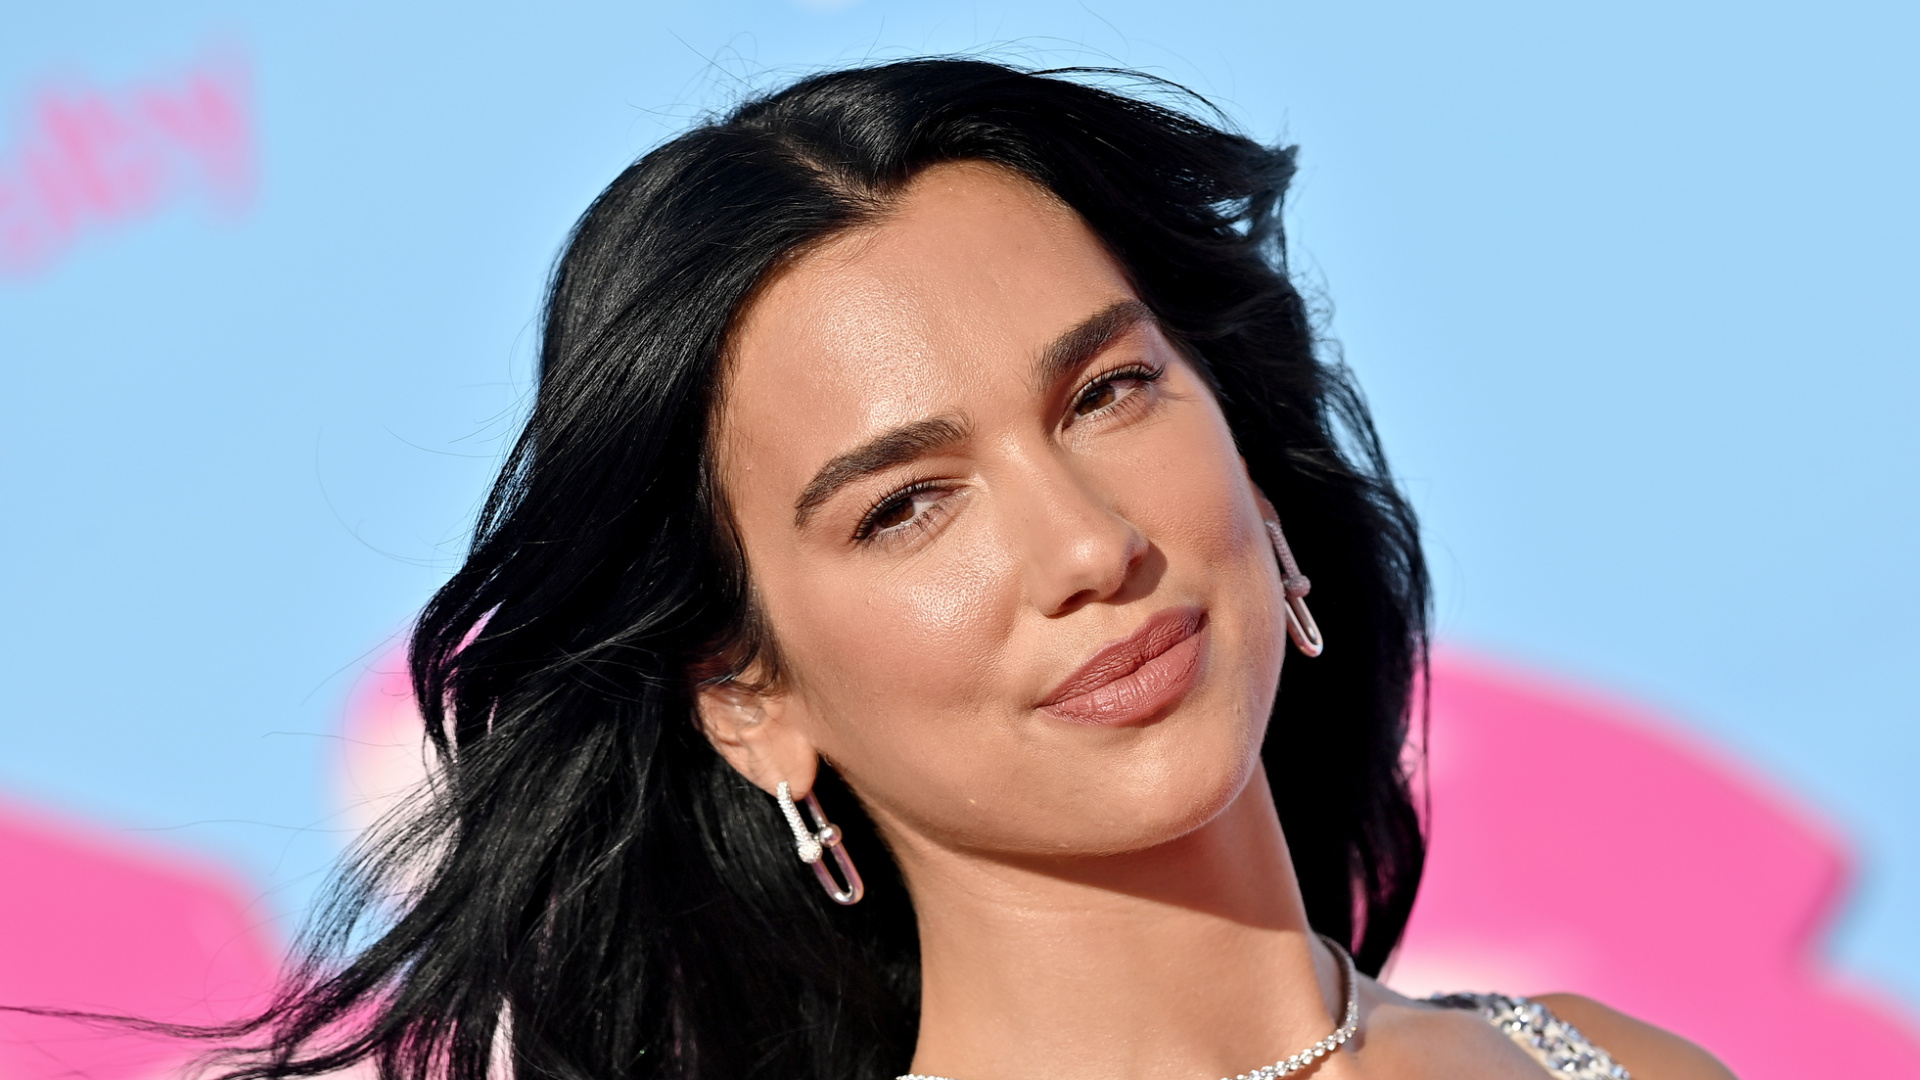 Dua Lipa's transparent mermaid gown at Barbie premiere and other great pictures of the star